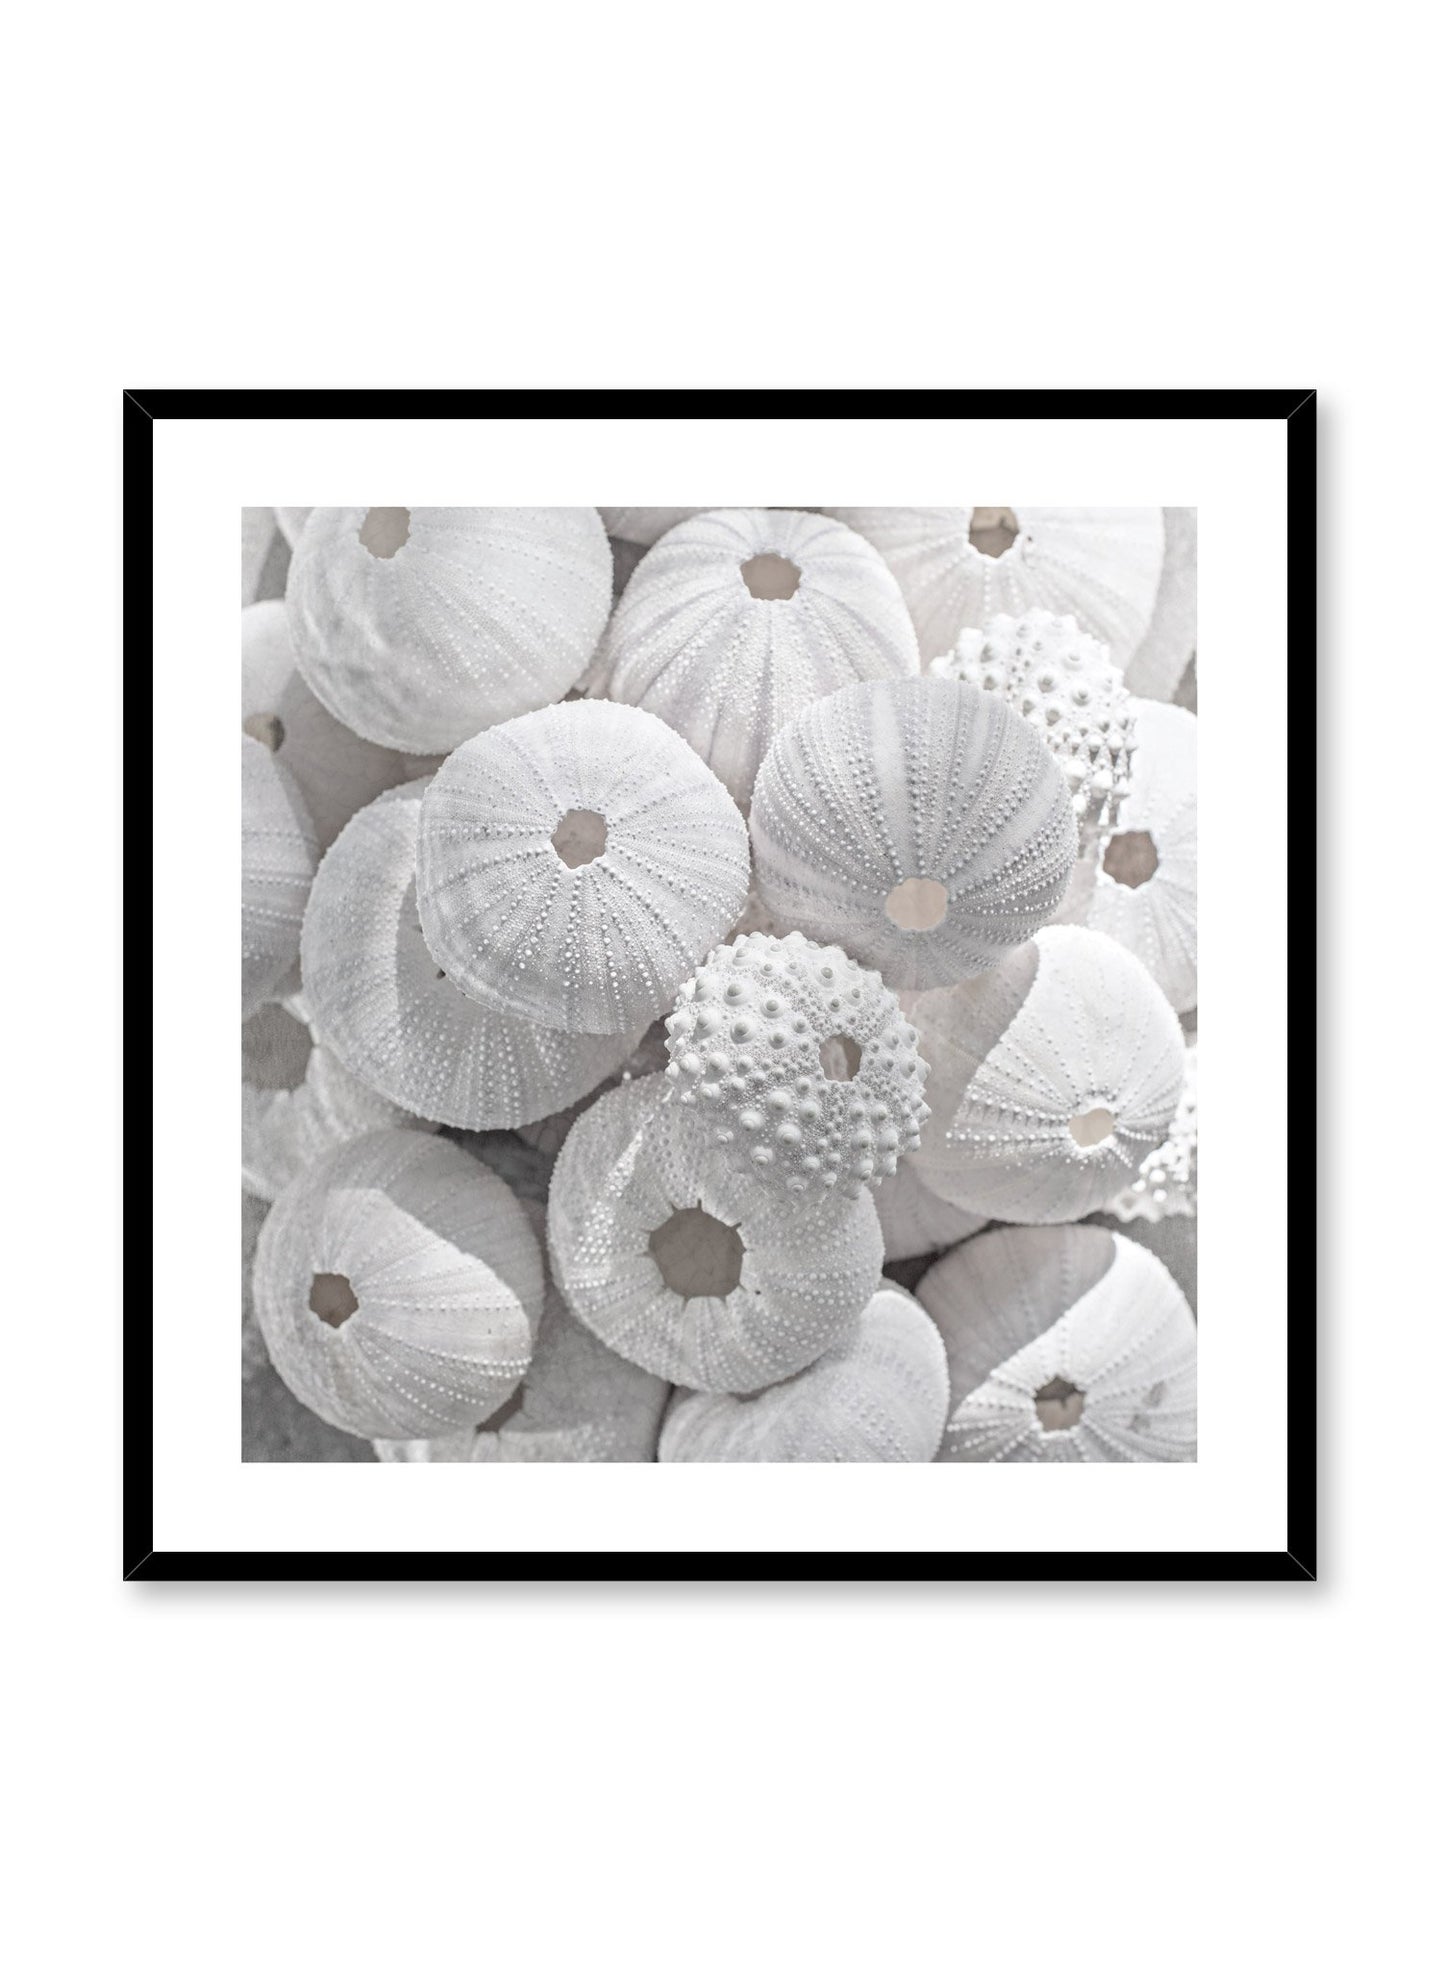 Minimalist design photography poster of Sea Treasures by Love Warriors Creative Studio - Buy at Opposite Wall